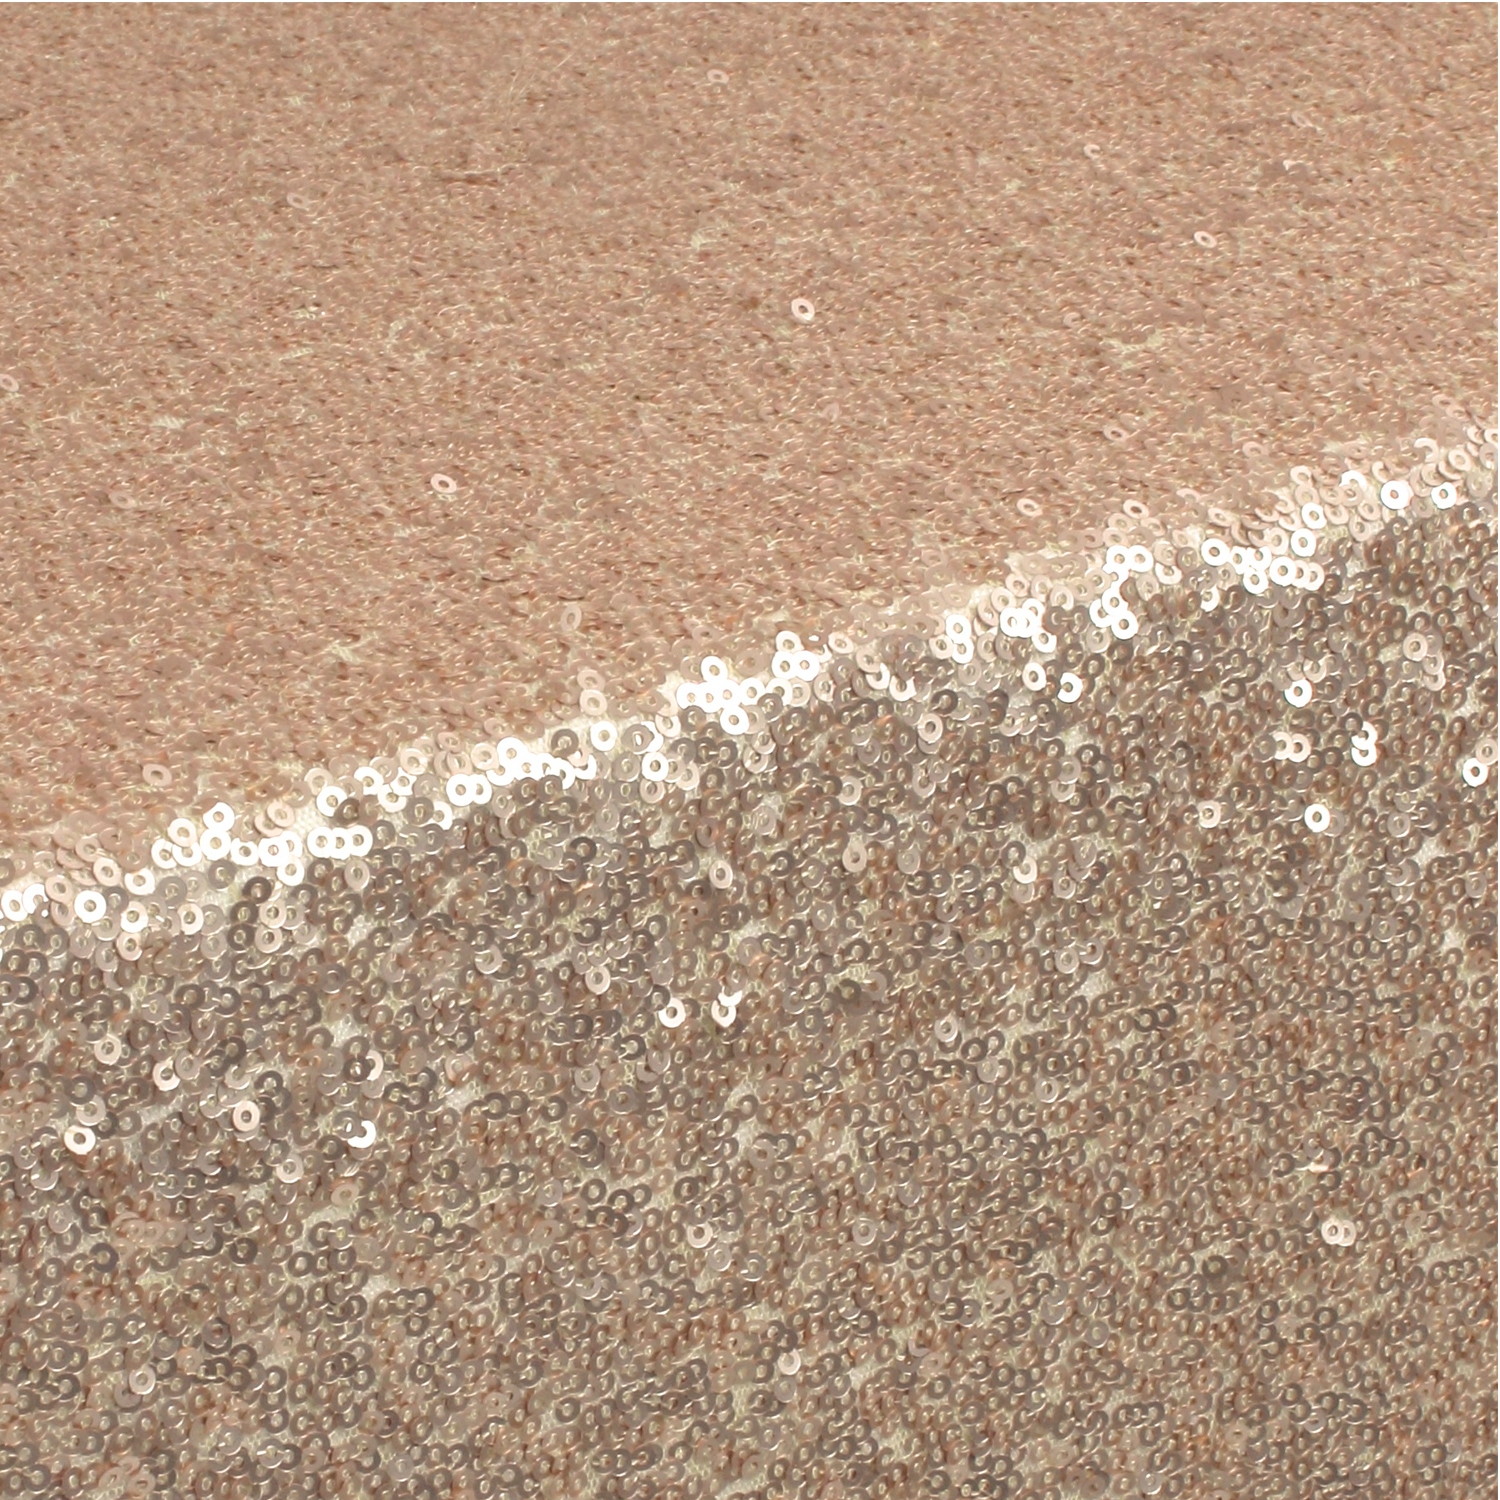 Payette Sequins - Fabric by the yard - White